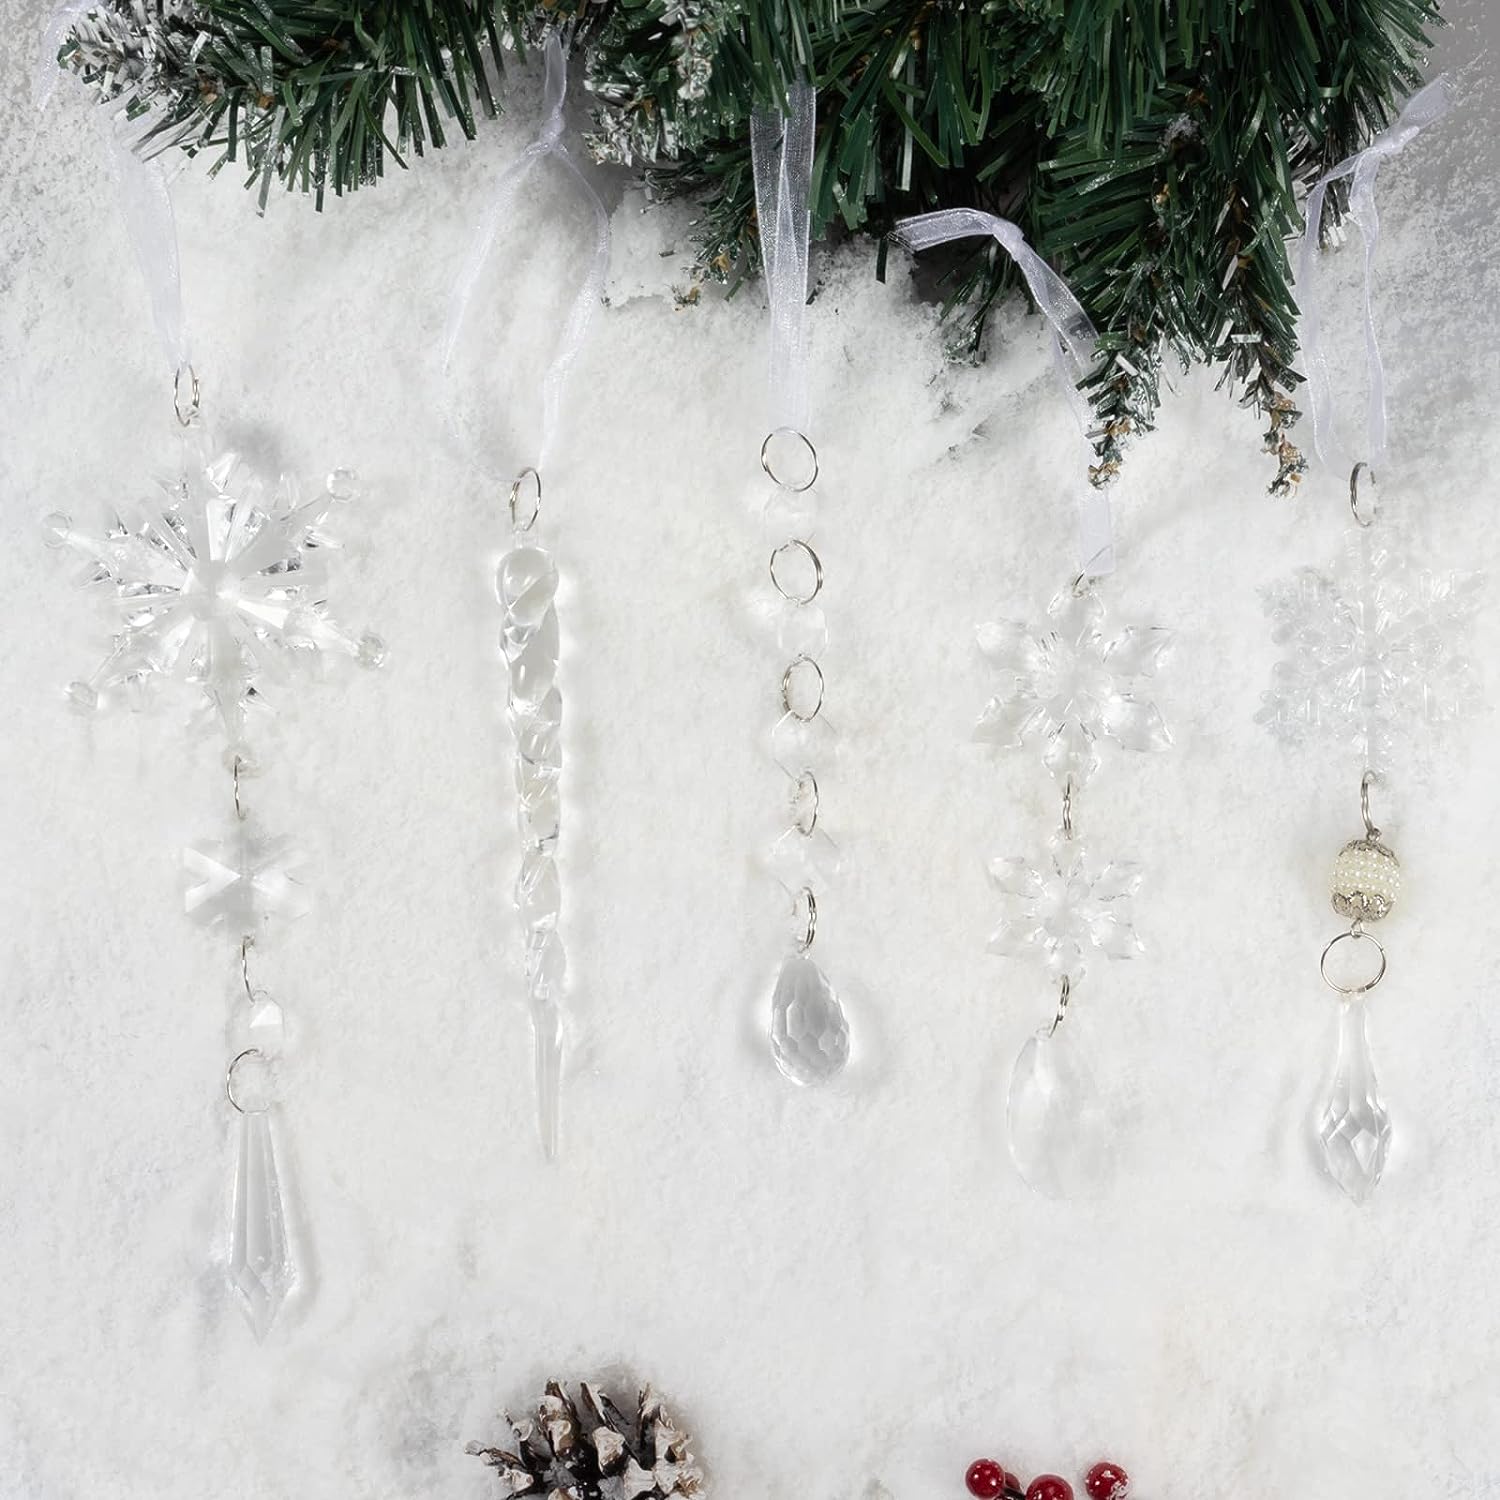 7pcs Crystal Christmas Ornaments for Christmas Tree Decorations-Hanging  Acrylic Snowflake and Icicle Ornaments with Drop Balls for Christmas Tree  New Year Party Decorations Supplies 